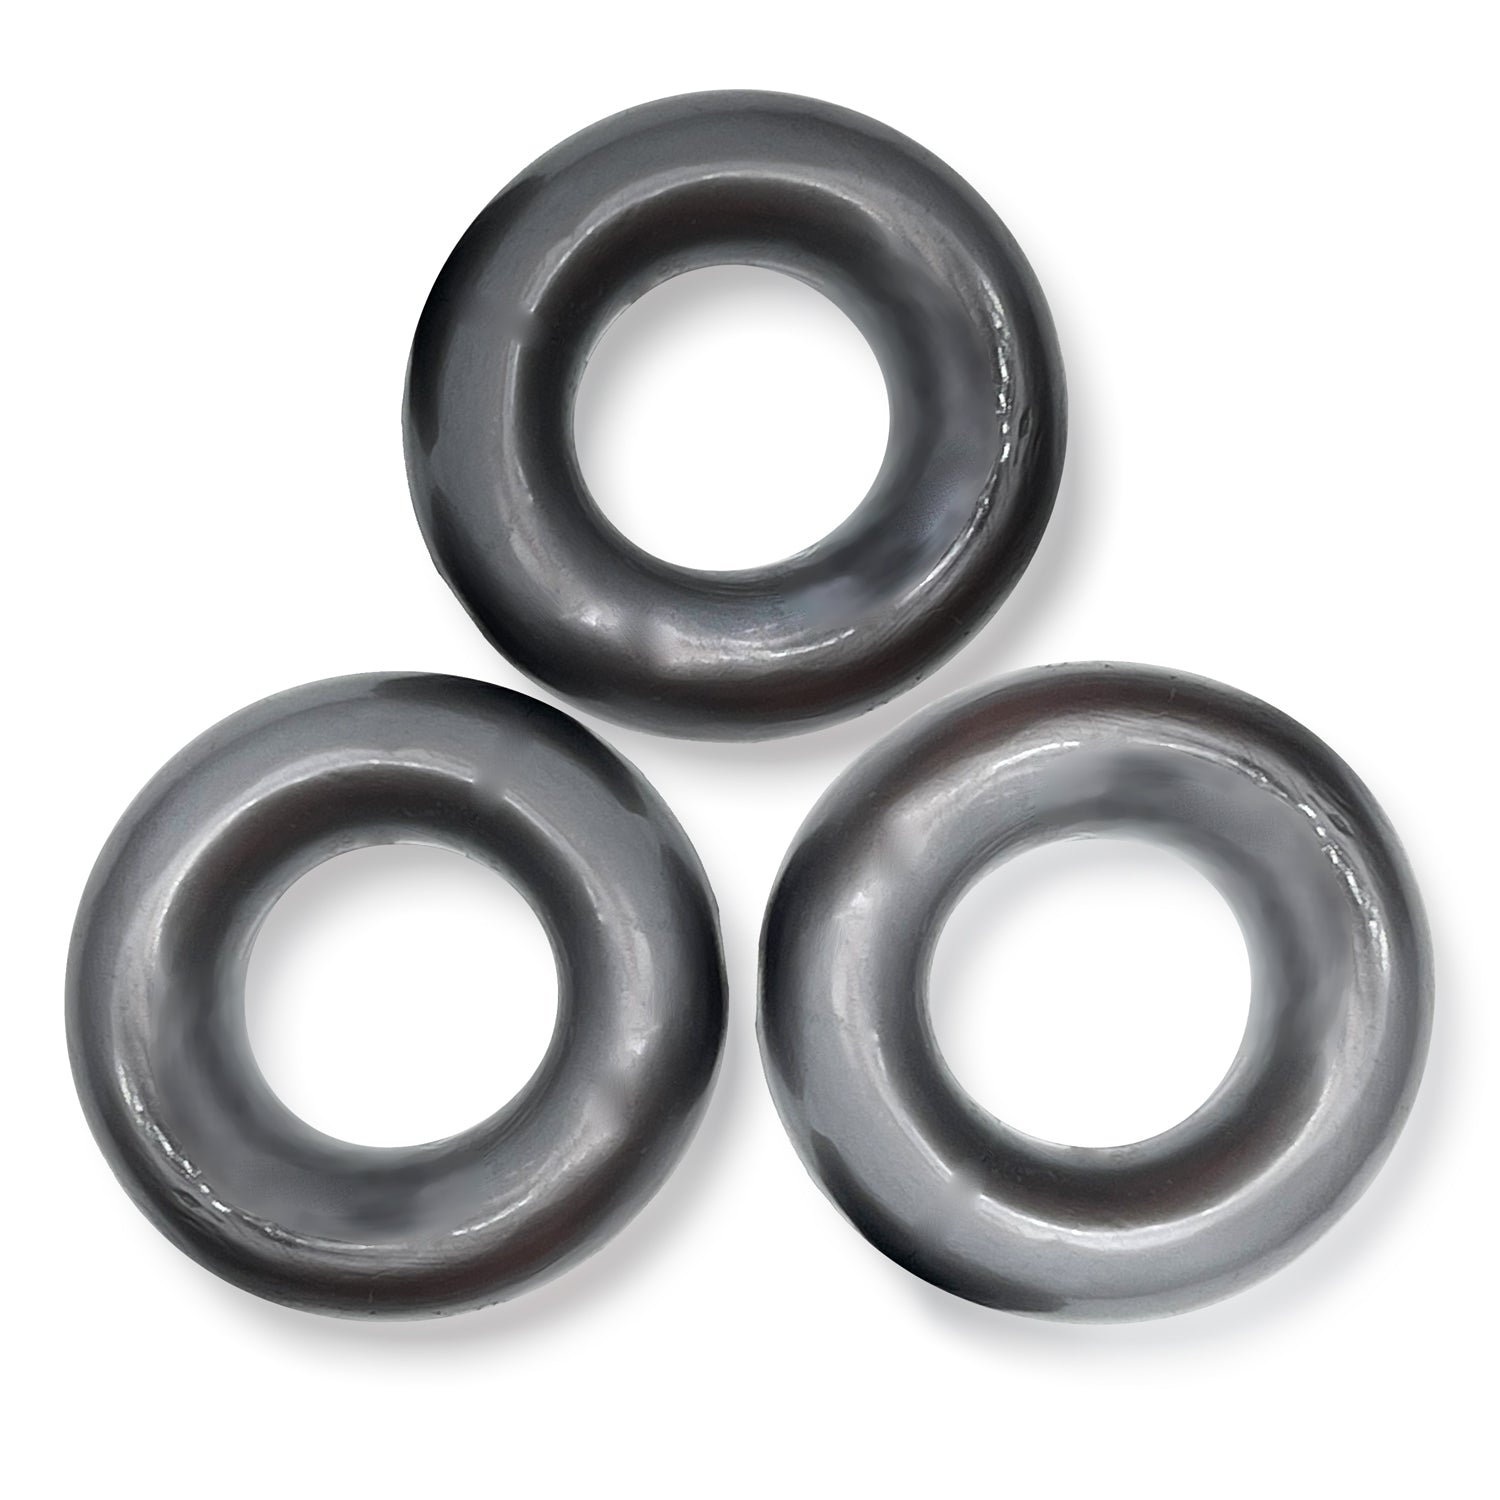 Oxballs FAT WILLY 3-Pack Jumbo Cockrings